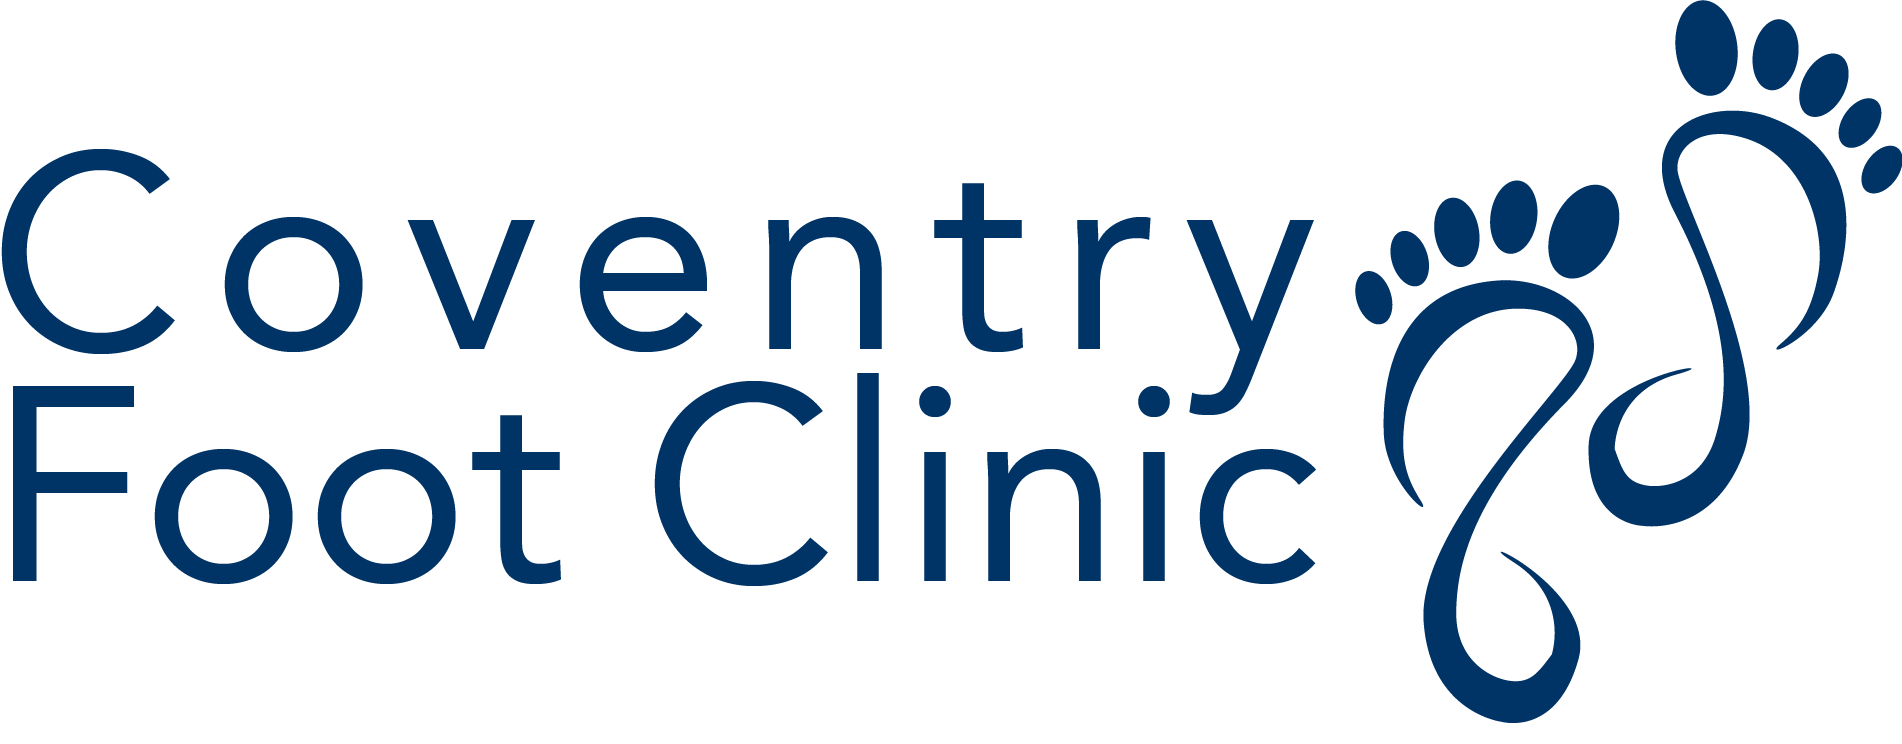 Privacy Policy Coventry Foot Clinic 